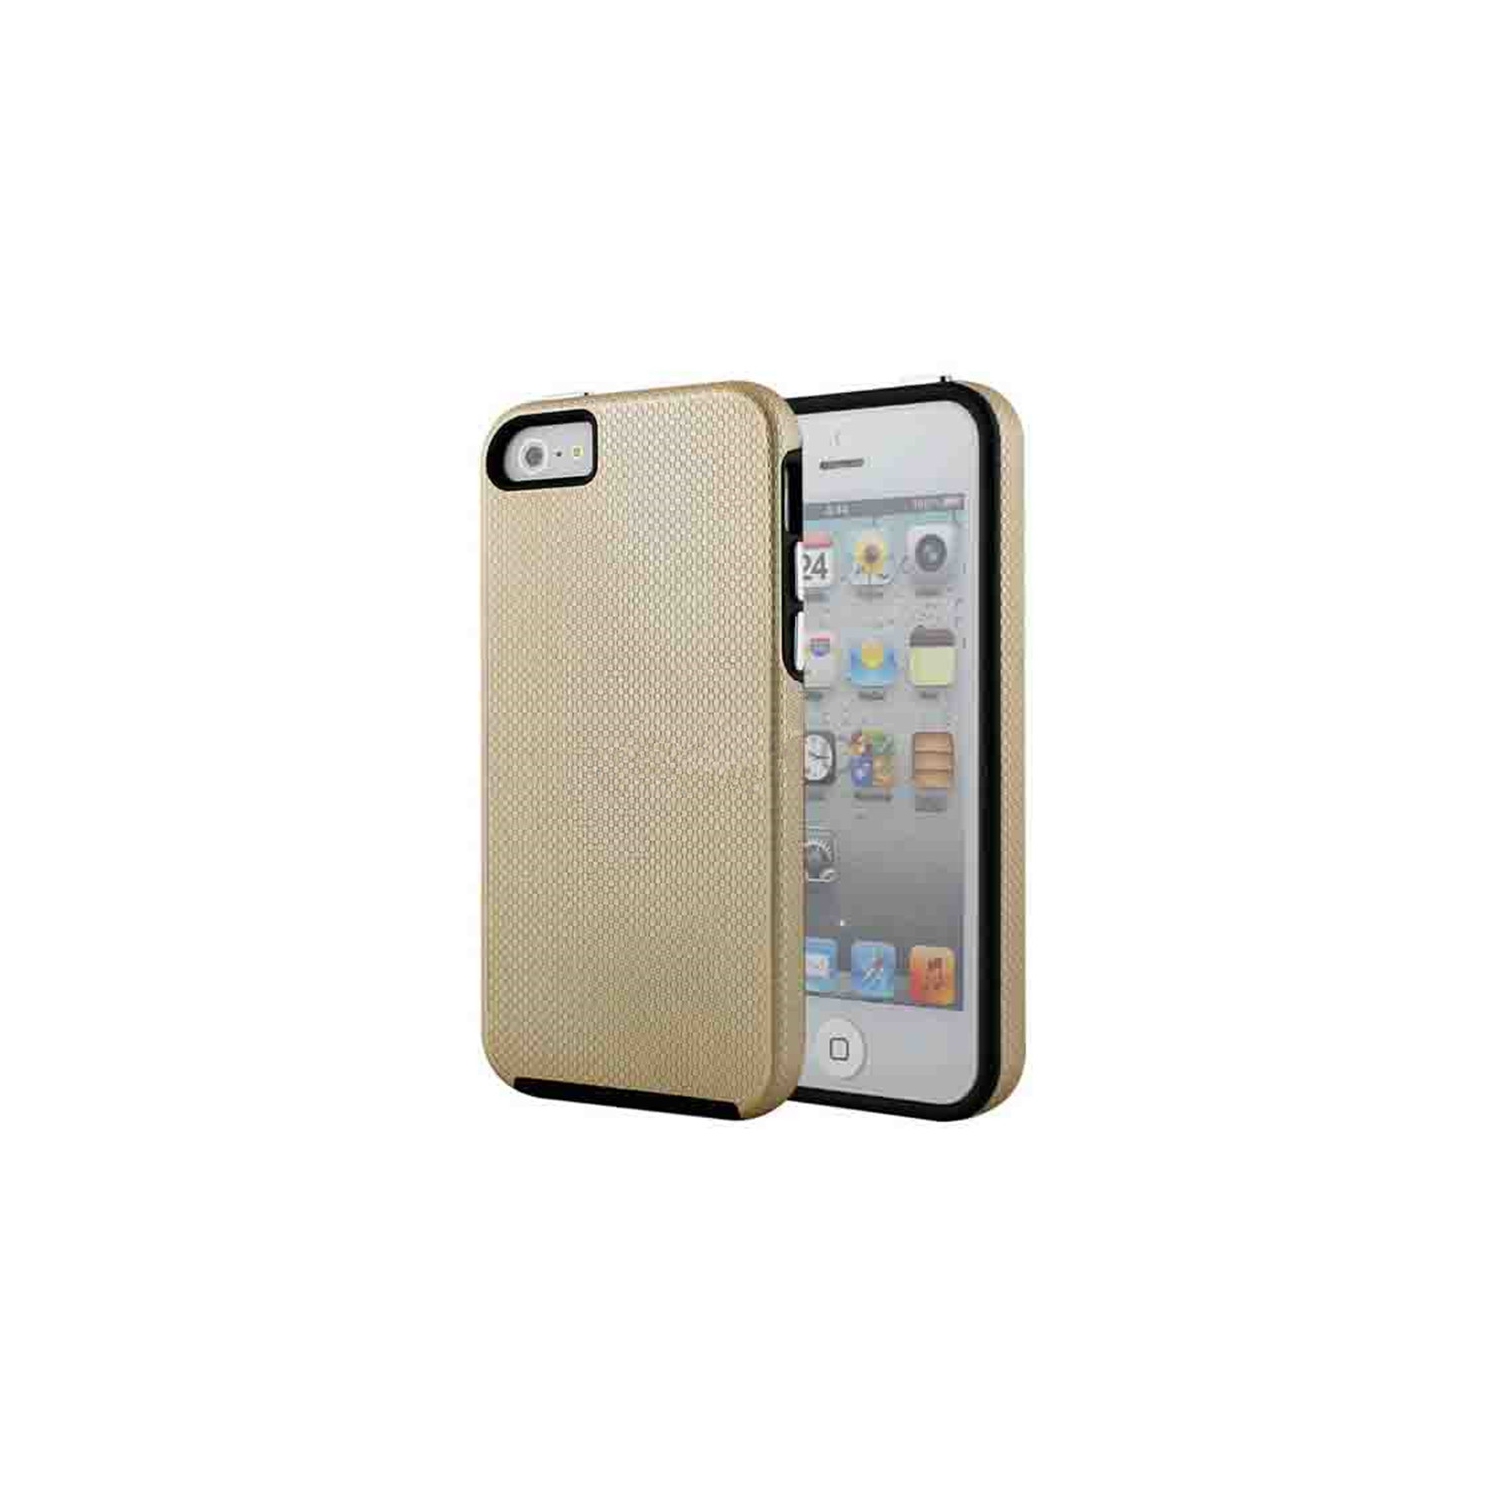 【CSmart】 Slim Fitted Hybrid Hard PC Shell Shockproof Scratch Resistant Case Cover for iPhone 5 / 5S / SE, Gold